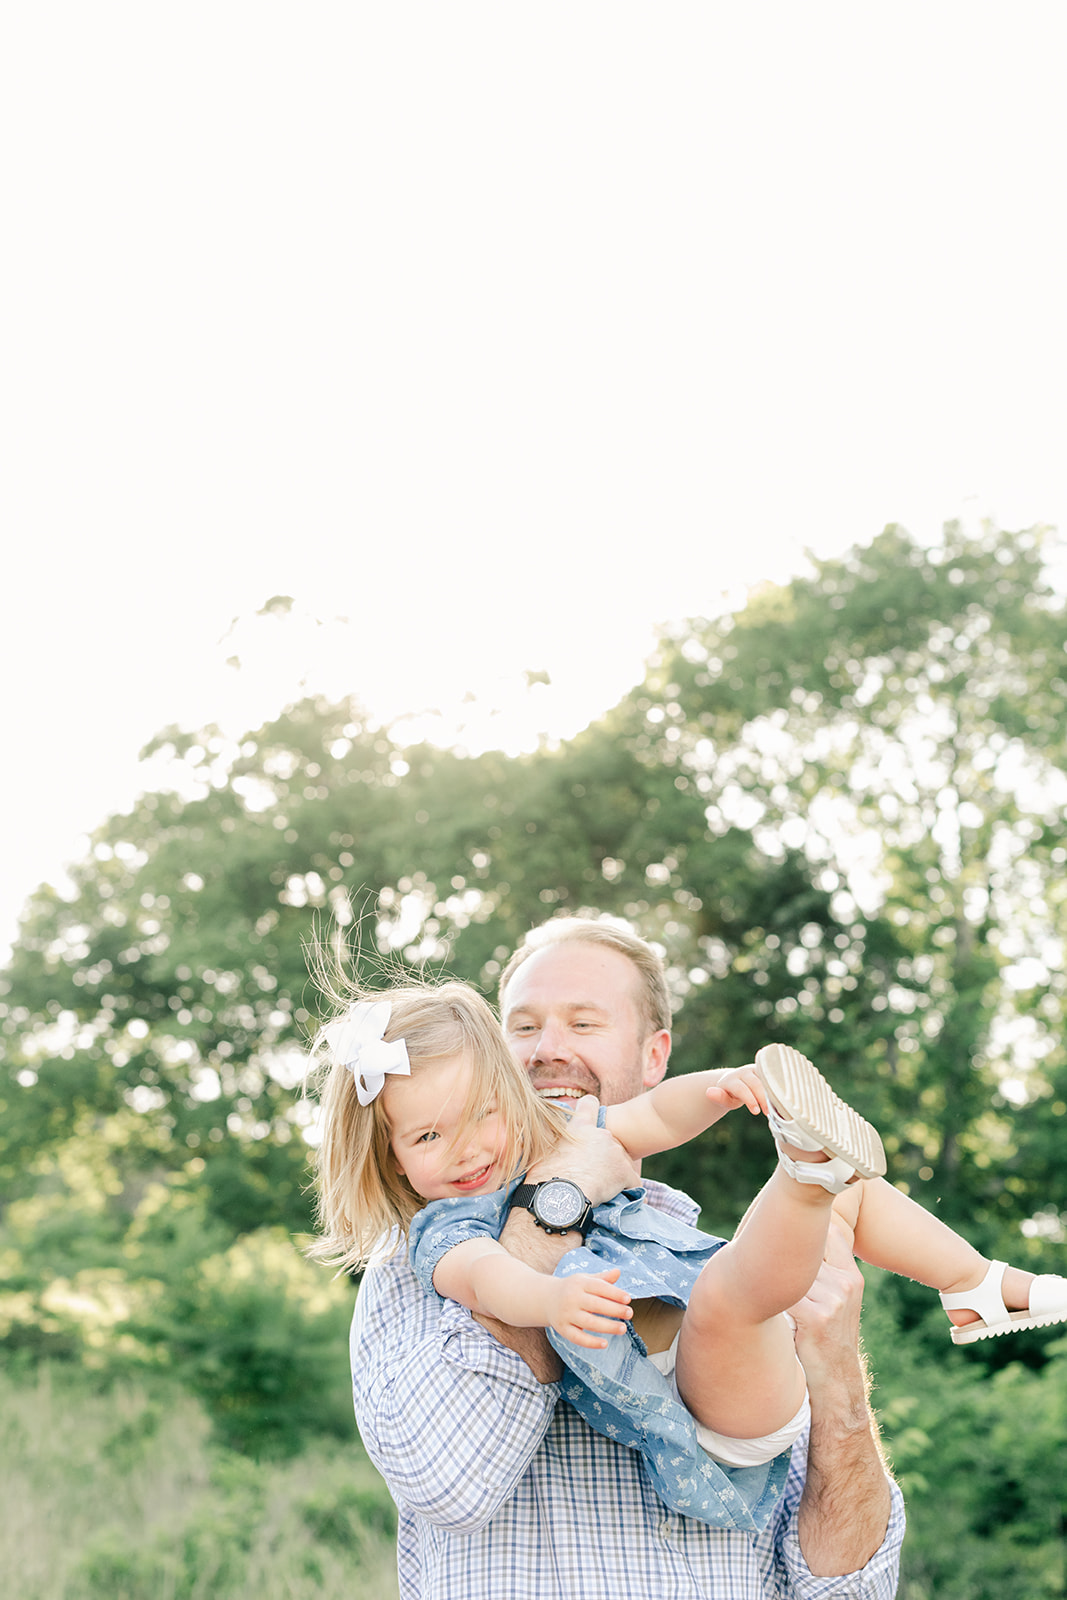 outdoor family photos for 2 year baby milestone session in nashville tennessee. photo of dad and daughter